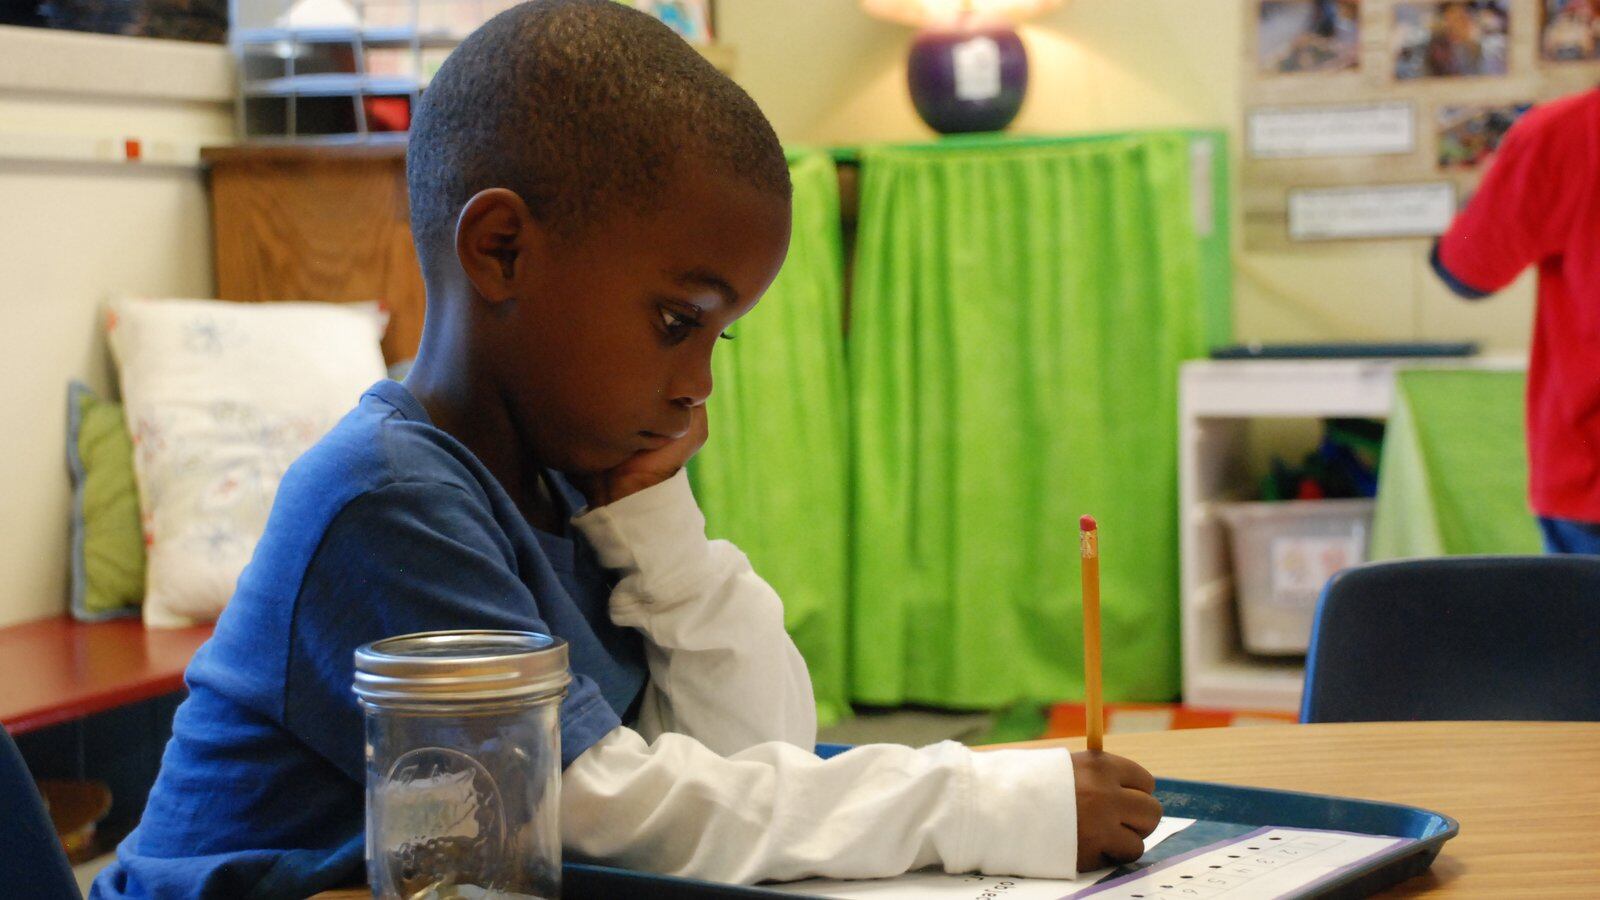 A student works at Tollgate Elementary School in Aurora. (Photo by Nic Garcia, Chalkbeat)